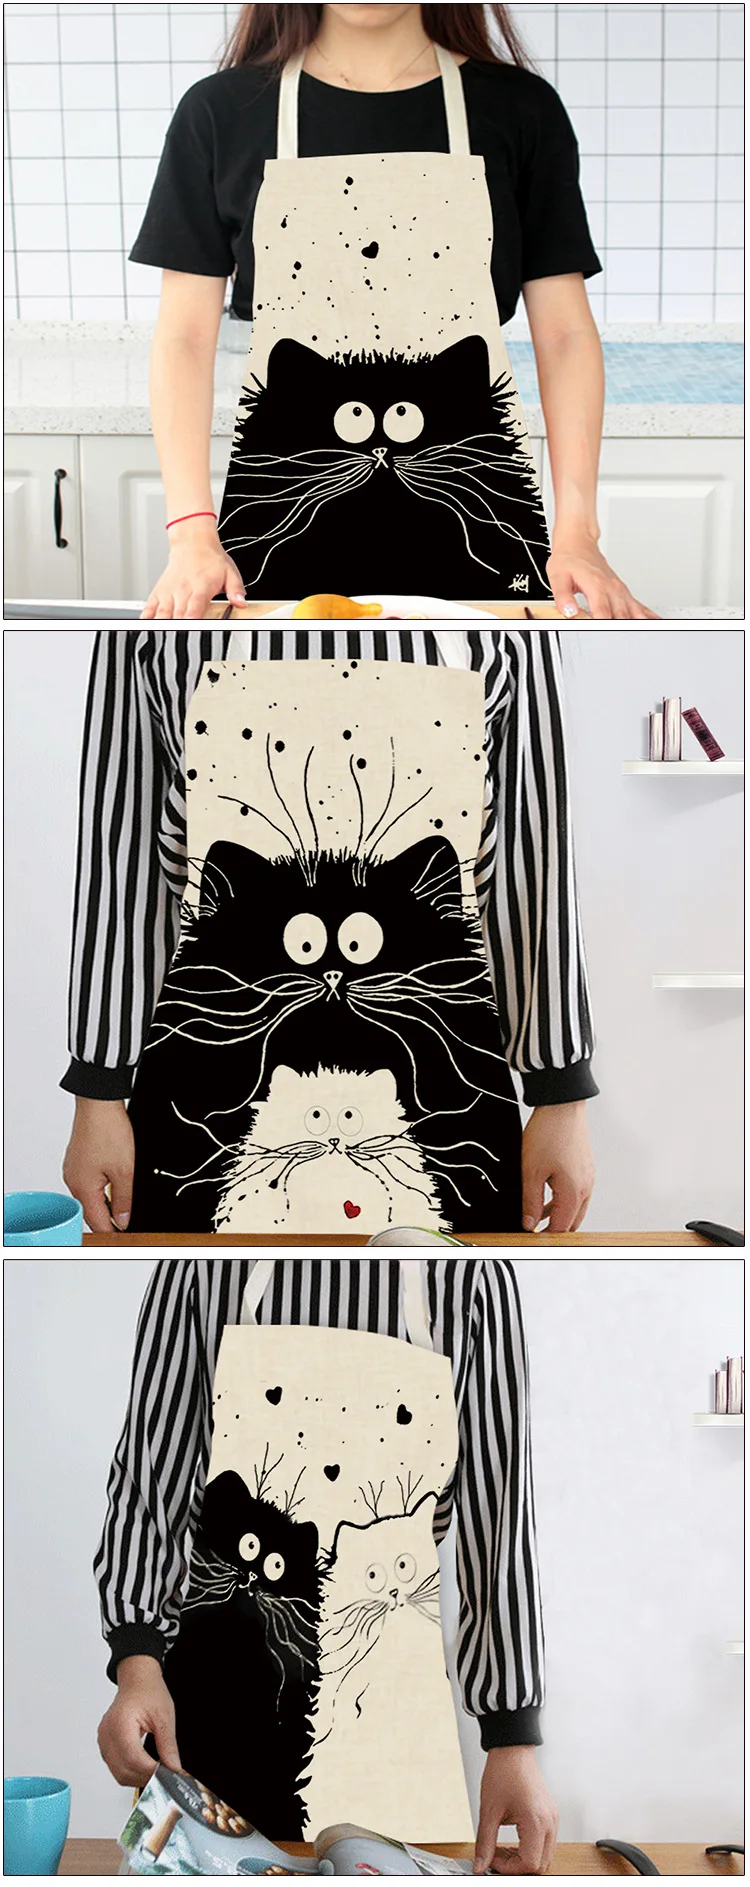 1Pcs Kitchen Apron Cute Cartoon Cat Printed Sleeveless Cotton Linen Aprons for Men Women Home Cleaning Tools 66*47cm